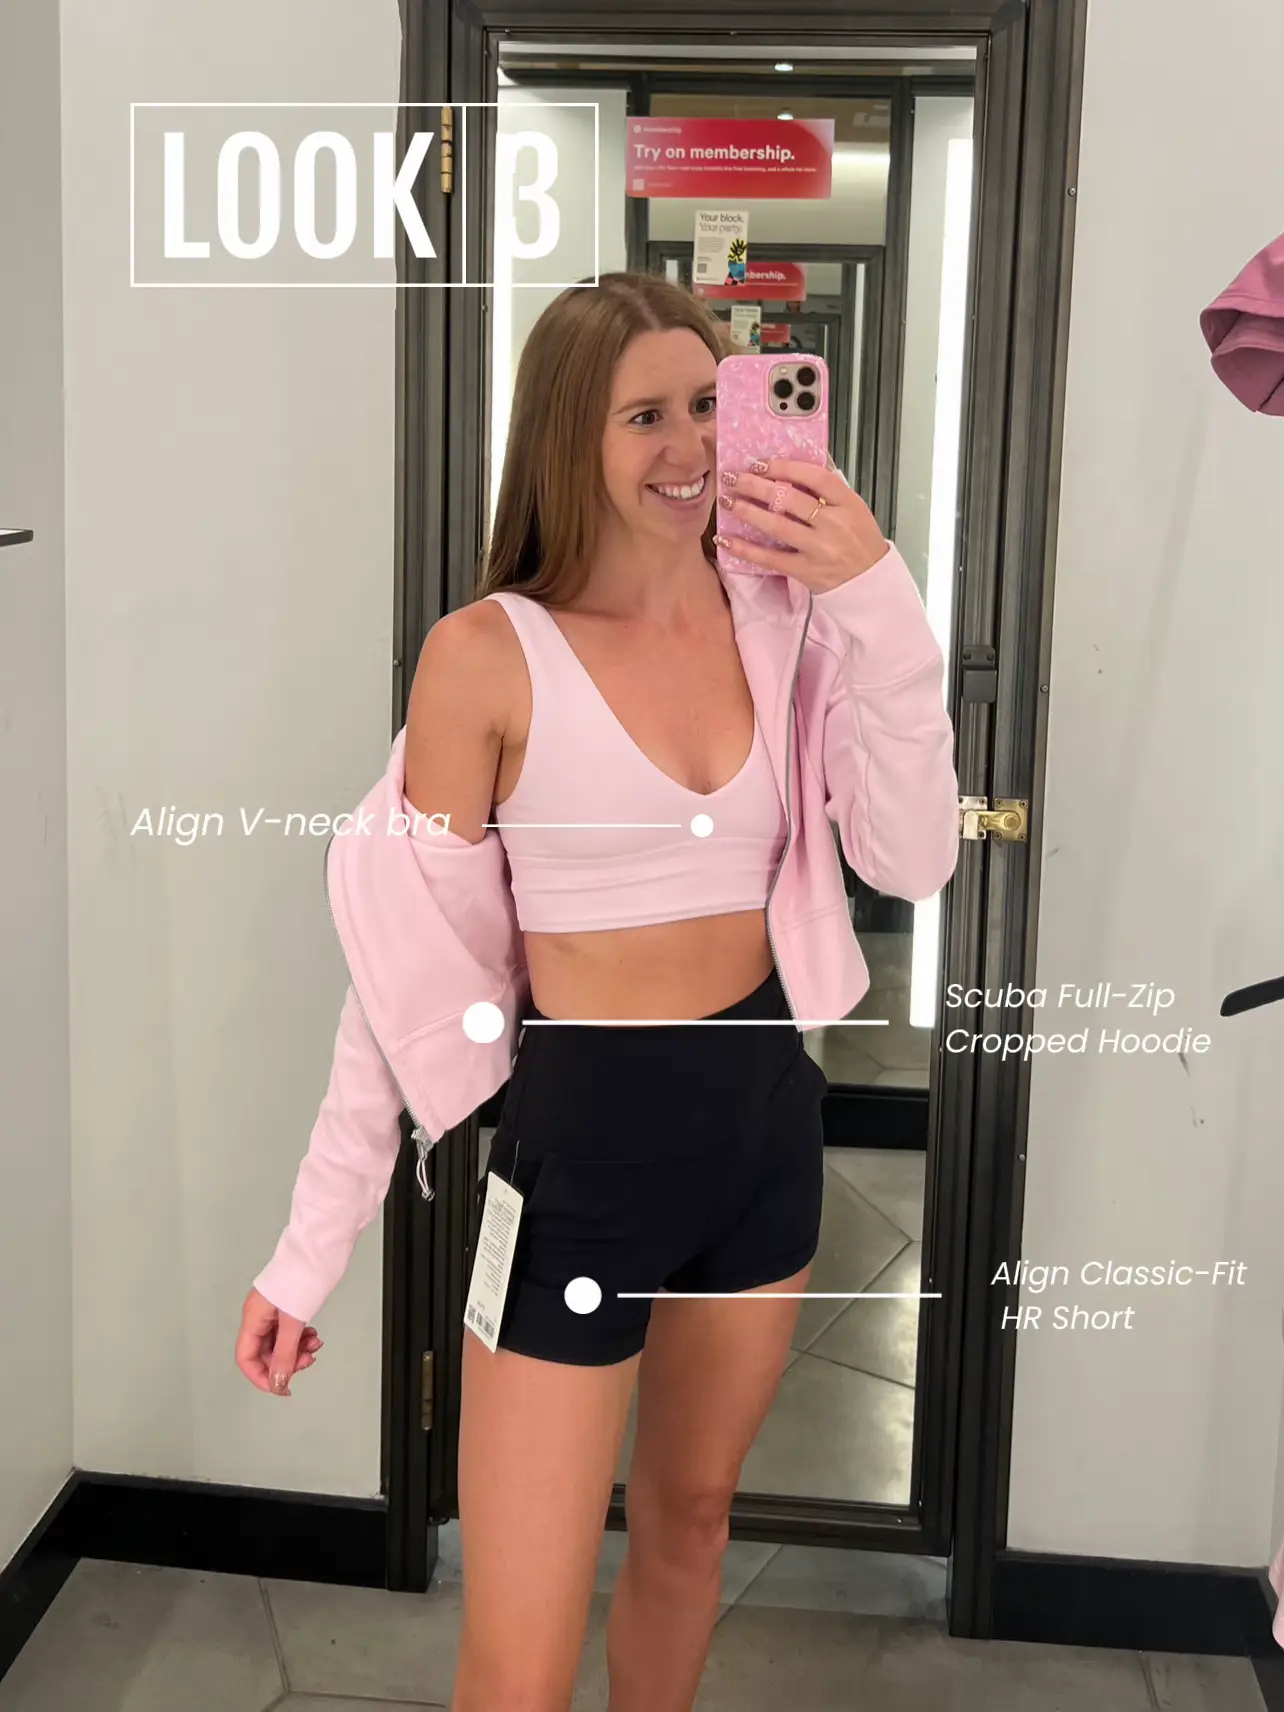 Come shopping with me at Lululemon, Gallery posted by Jordynlorene